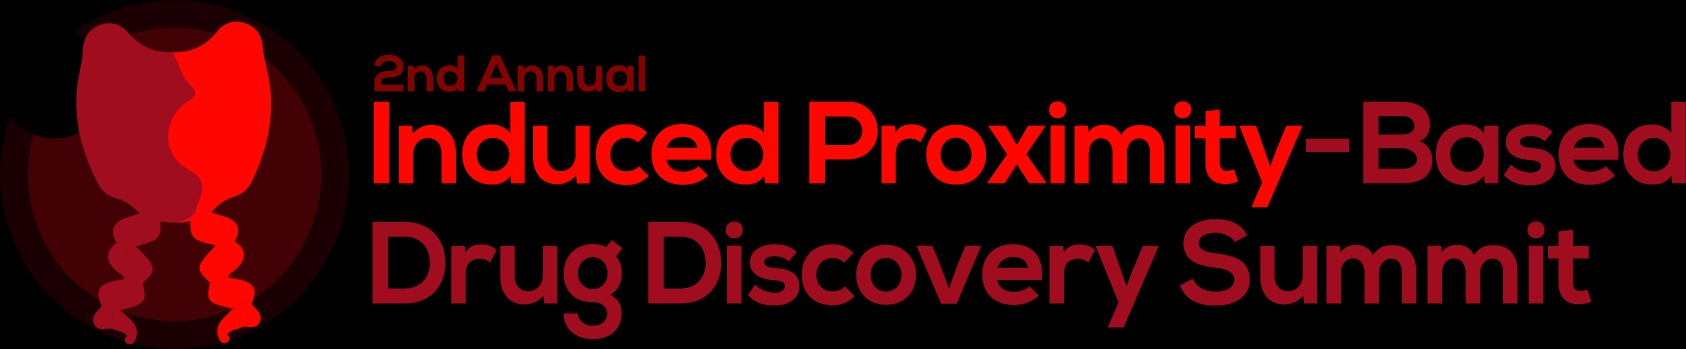 2nd Induced Proximity-Based Drug Discovery Summit